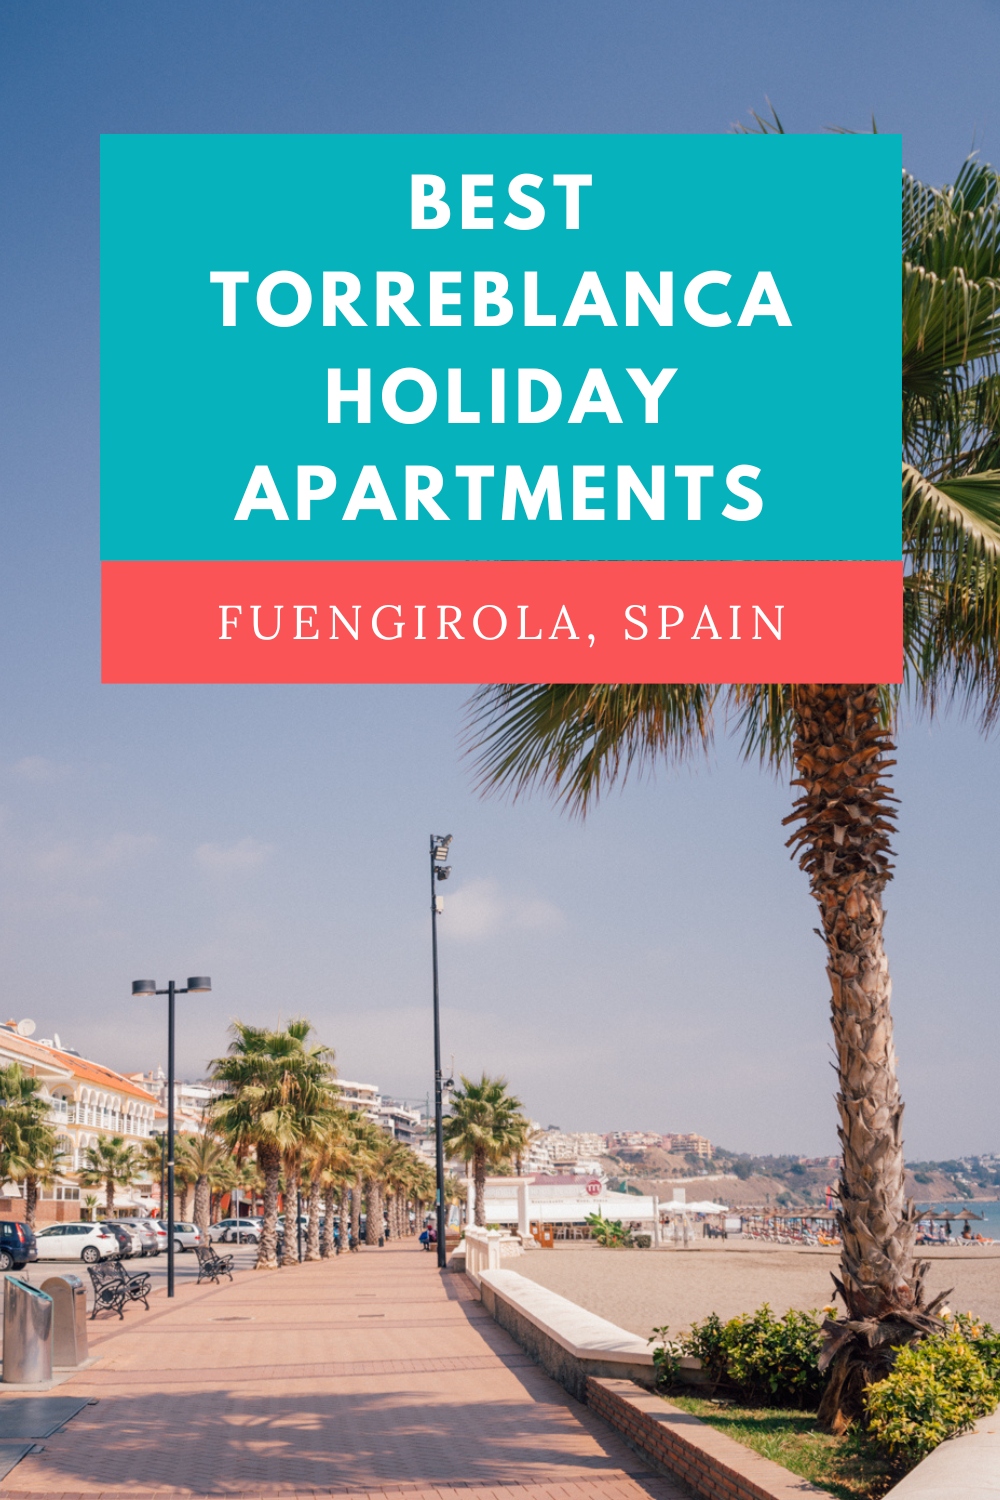 pinterest image for an article about best holiday apartments in torreblanca, Fuengirola, Spain